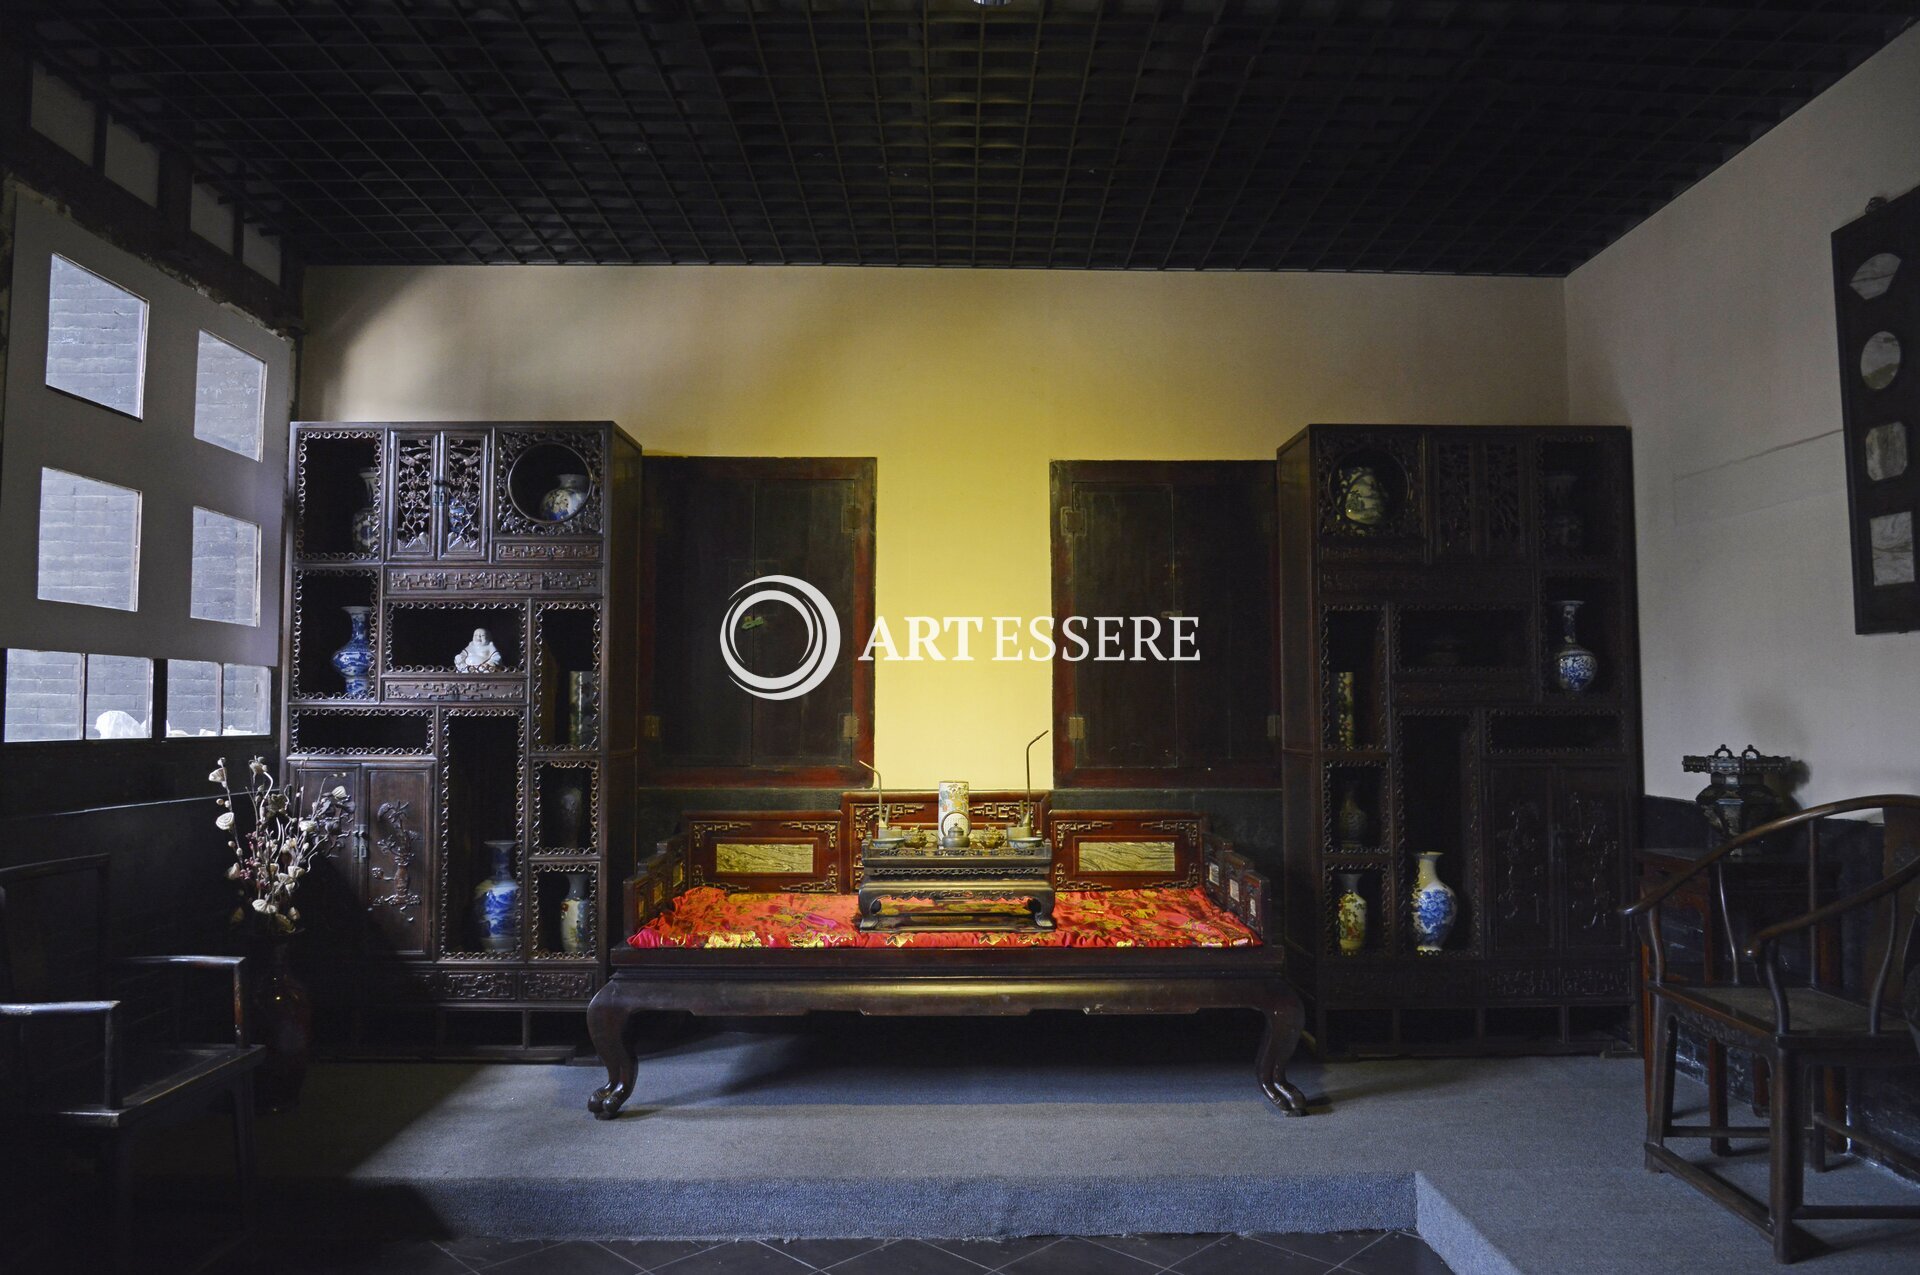 Furniture Museum of the Shaanxi Rich